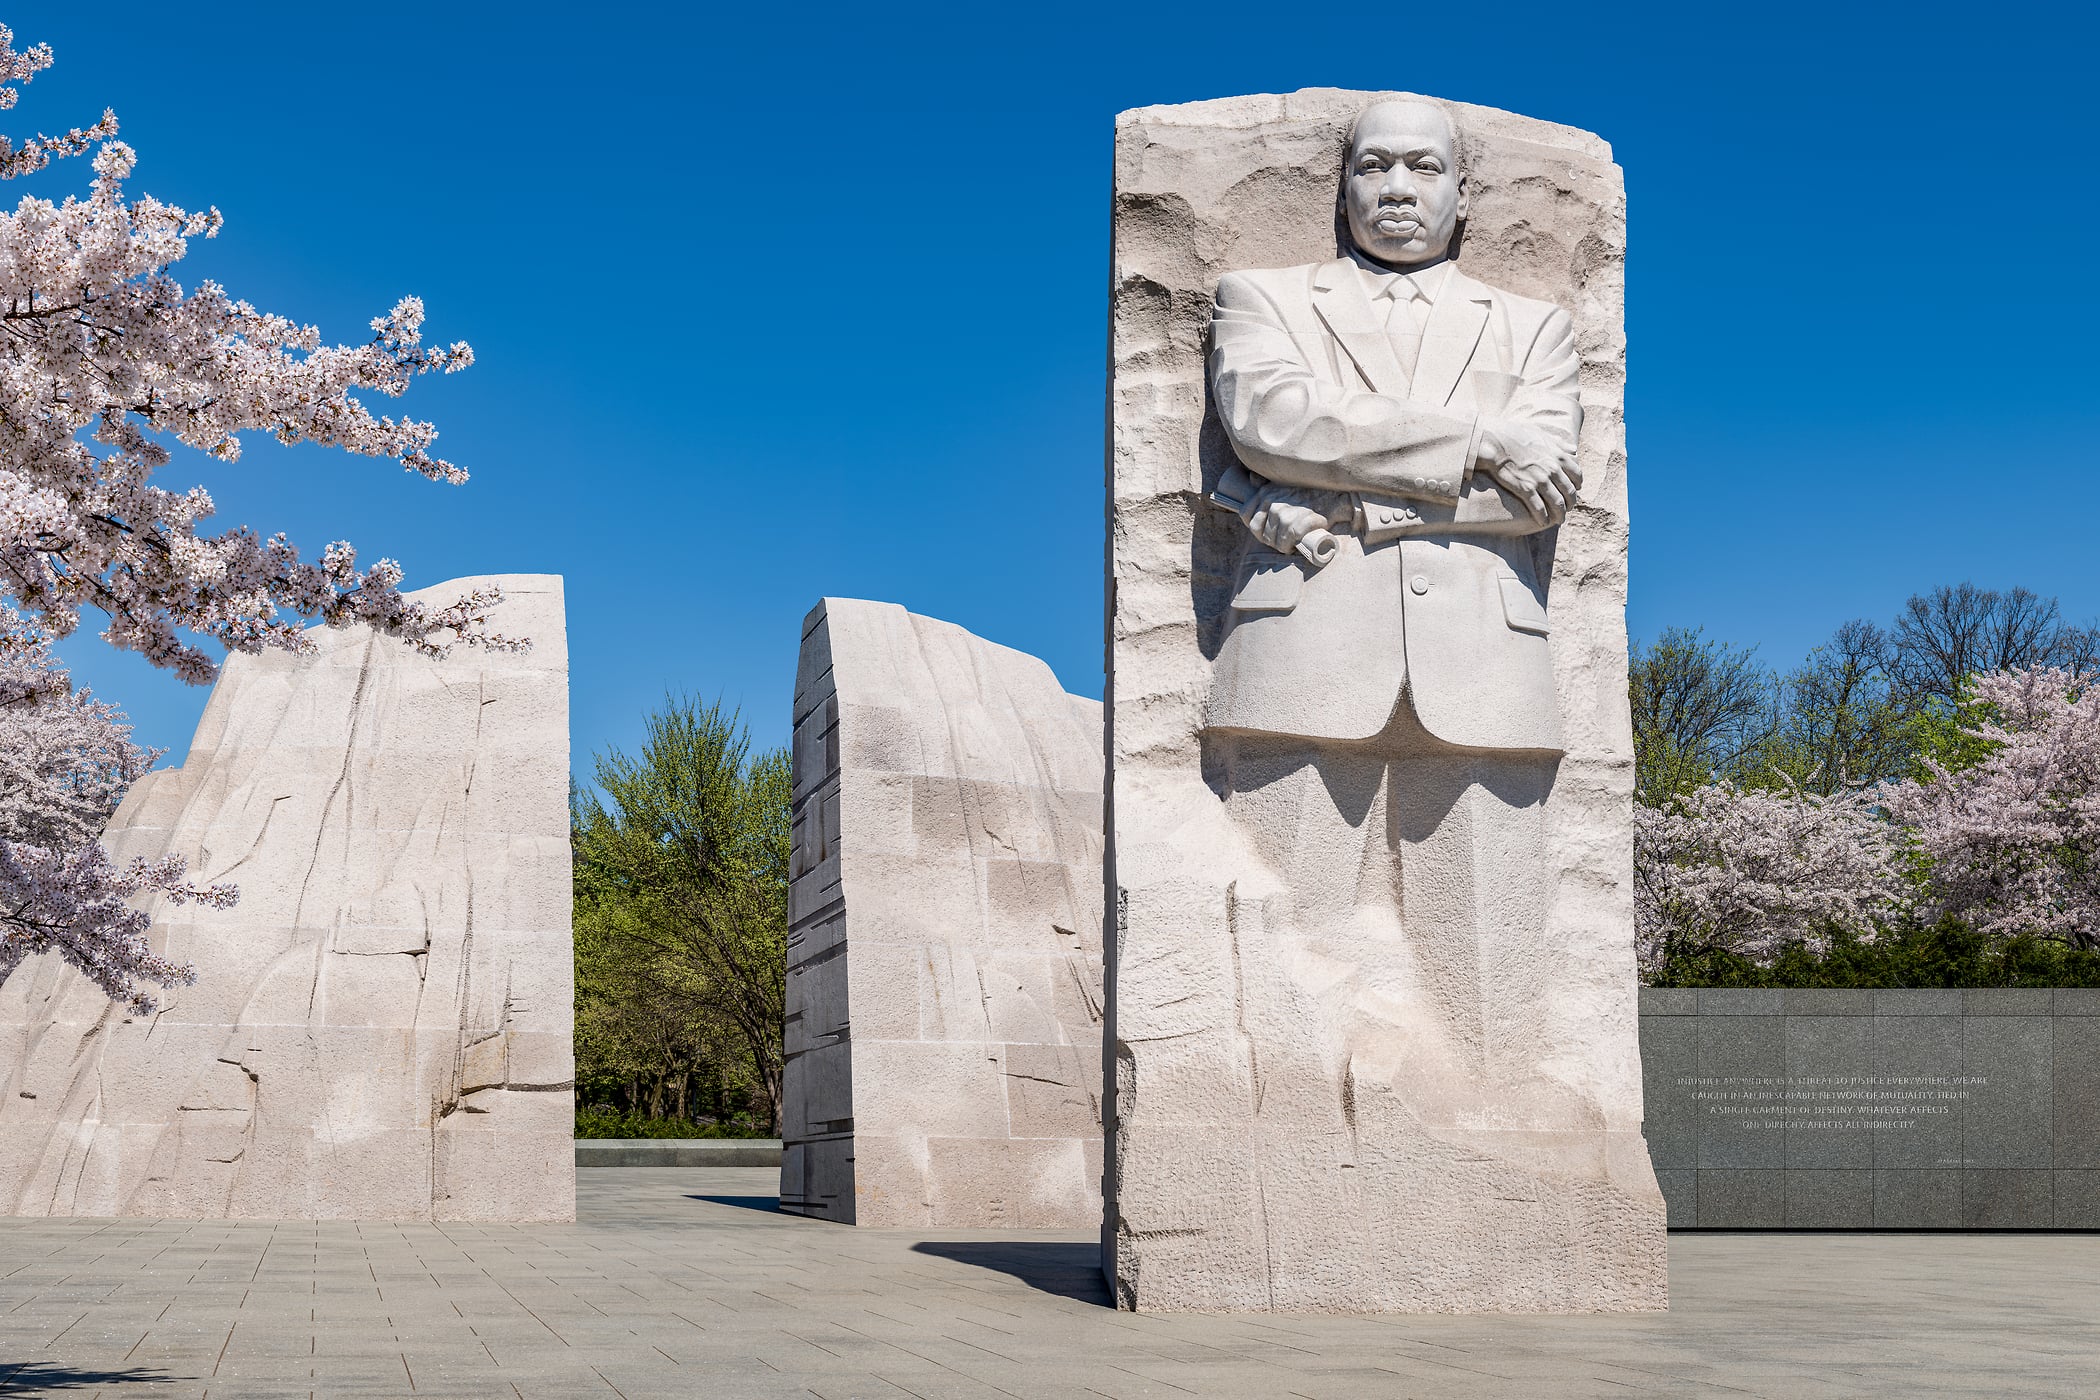 556 megapixels! A very high resolution, large-format VAST photo print of the Martin Luther King, Jr. memorial with cherry blossoms; photograph created by Tim Lo Monaco on the National Mall in Washington, D.C.